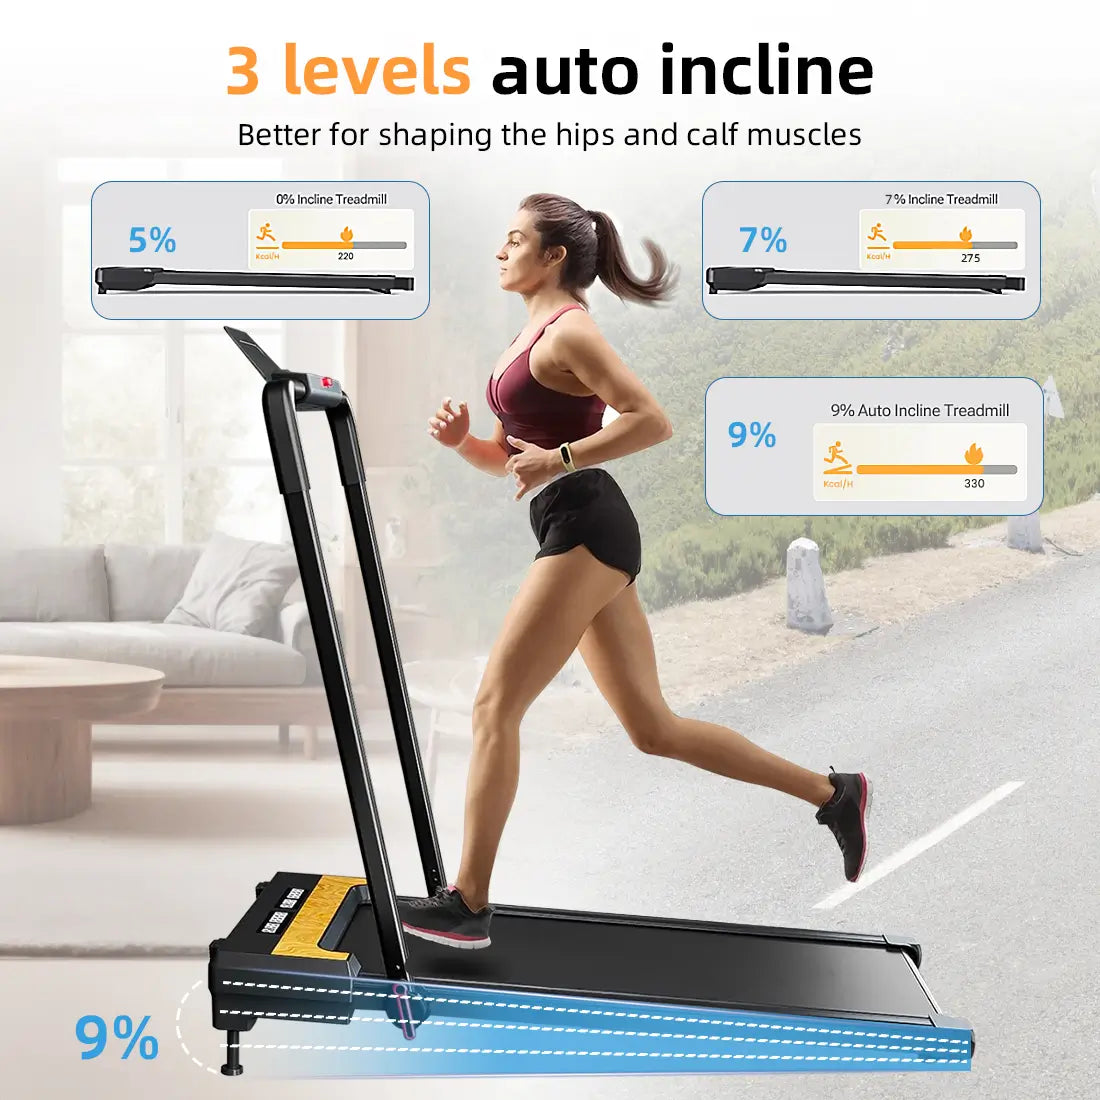 Tousains 2 in 1 incline treadmill with auto incline